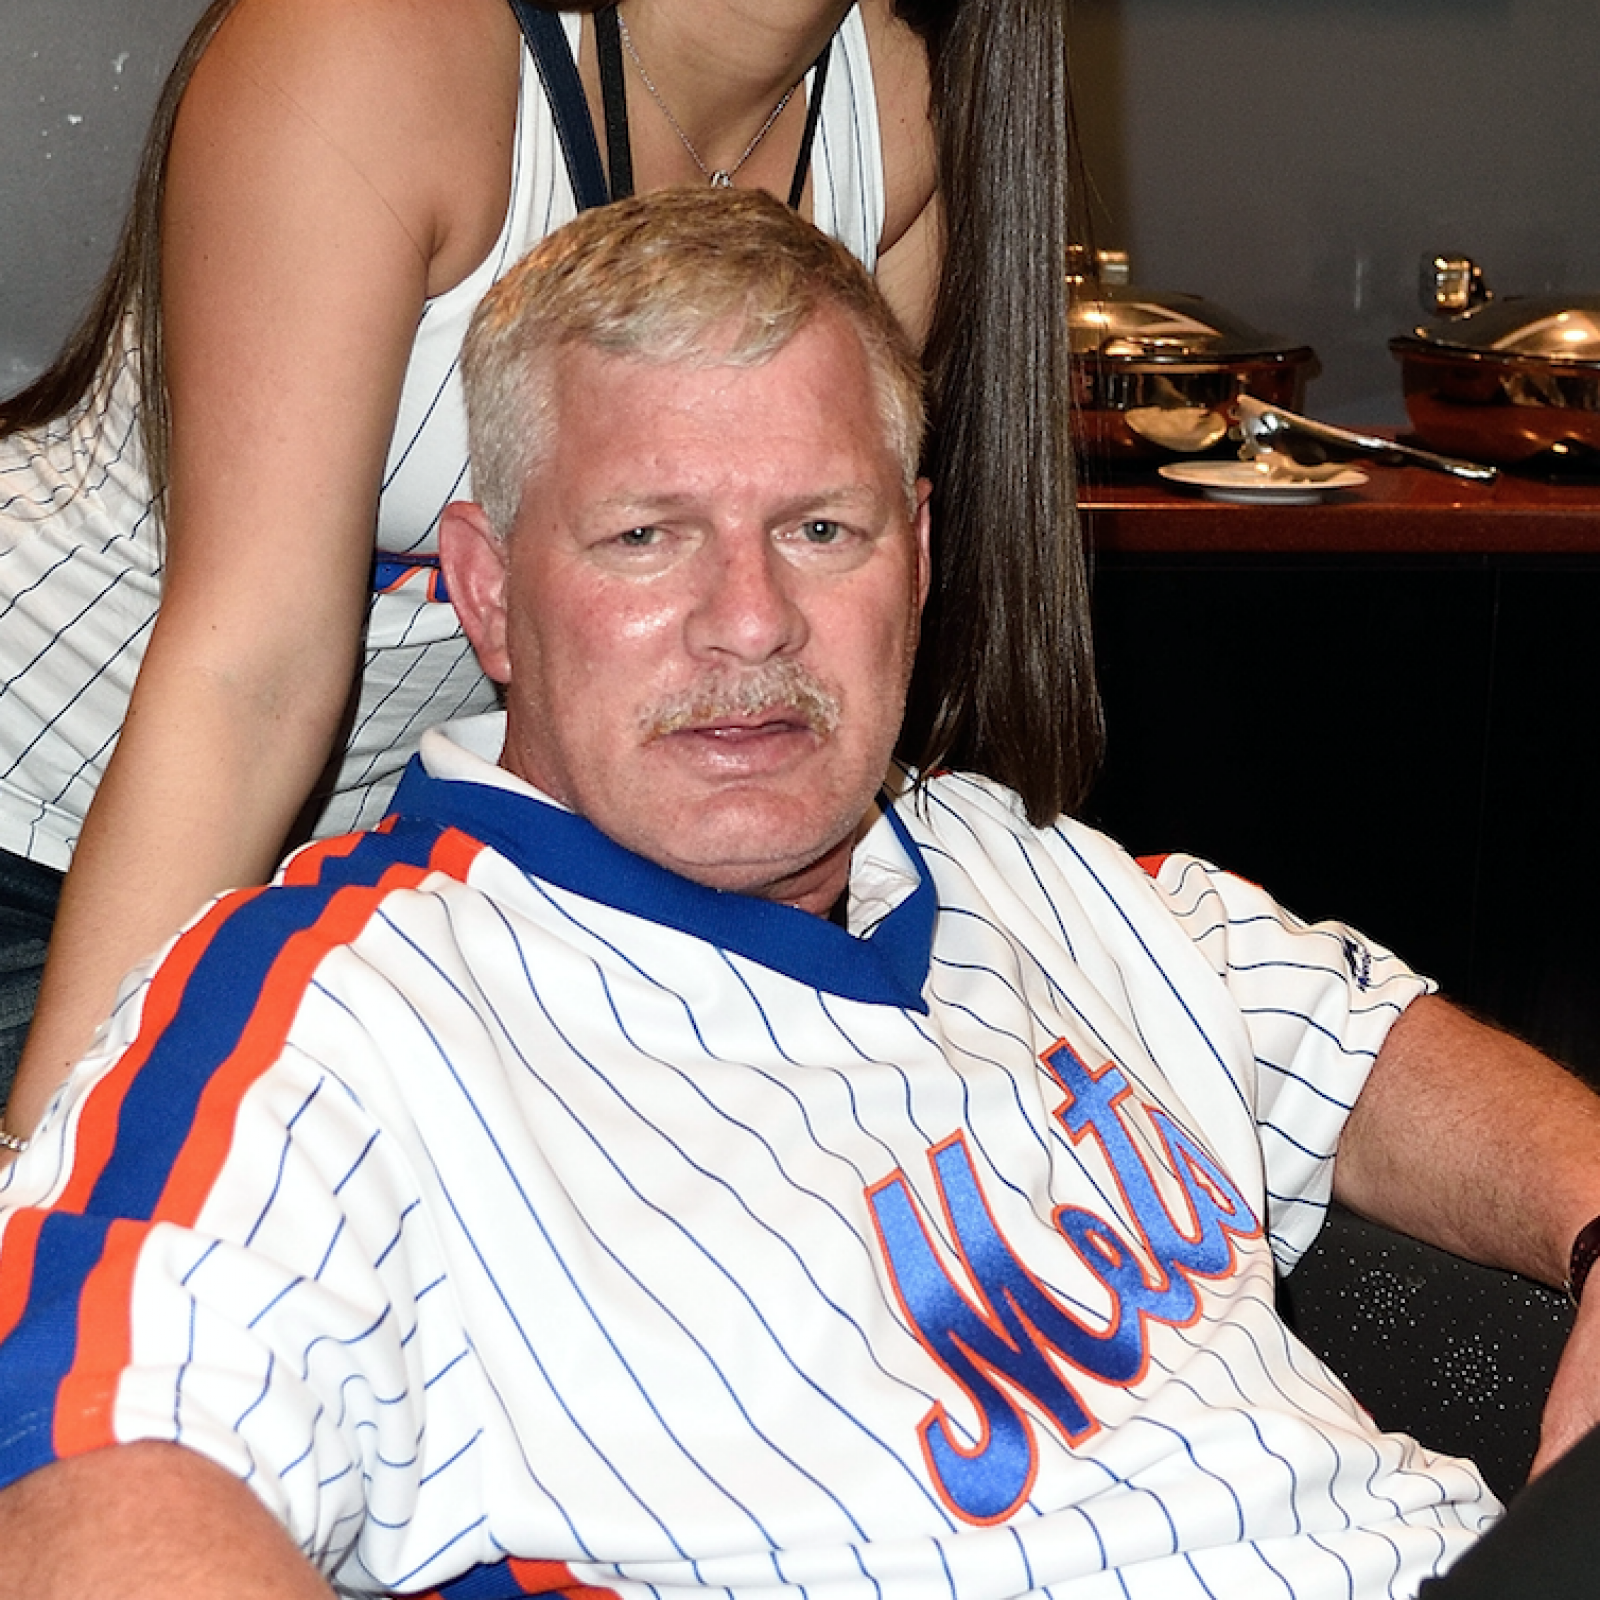 The Tragic Real-Life Details About Lenny Dykstra